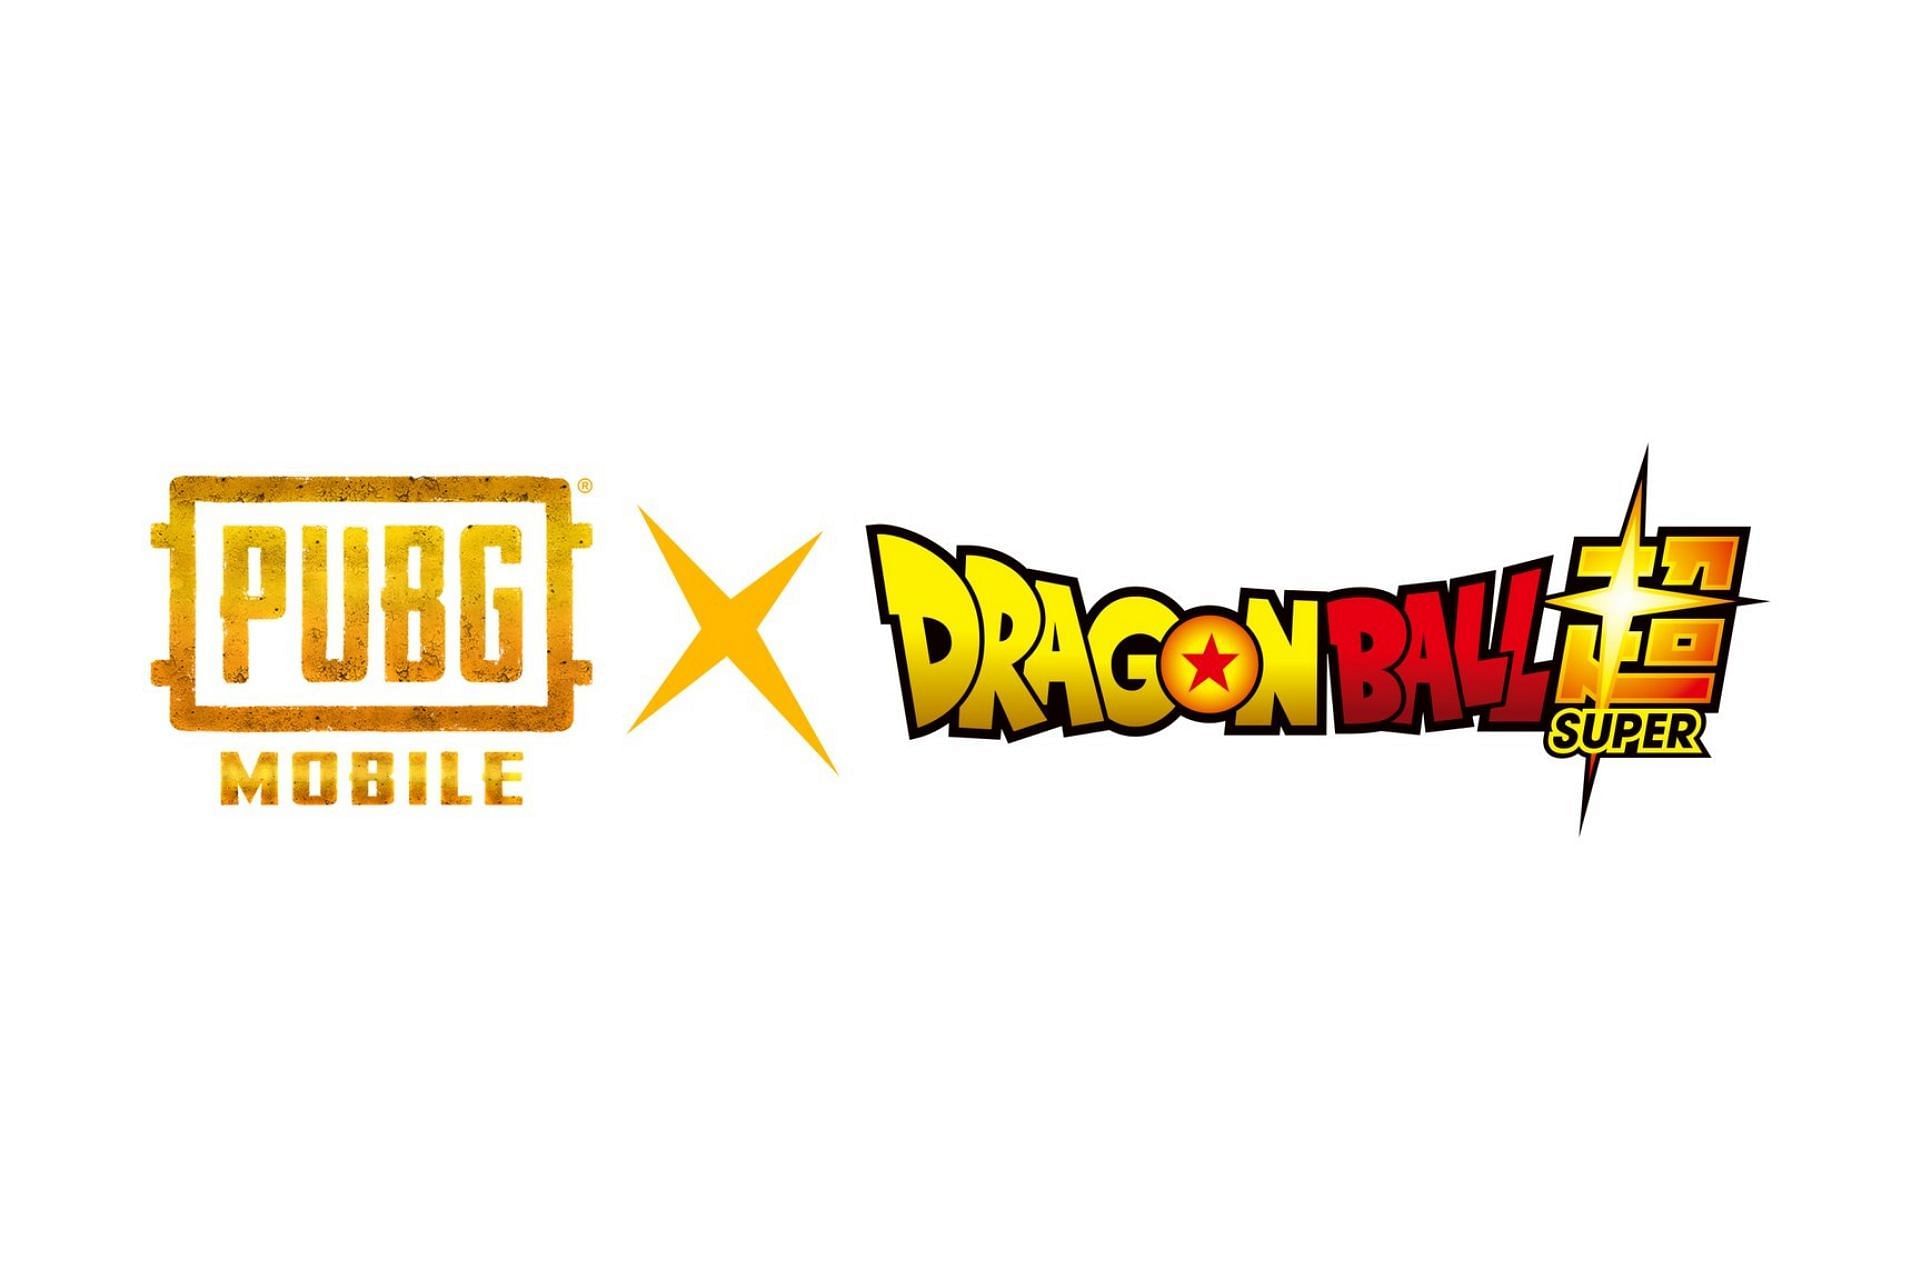 PUBG Mobile is going to collaborate with Dragonball soon (Image via Tencent Games)